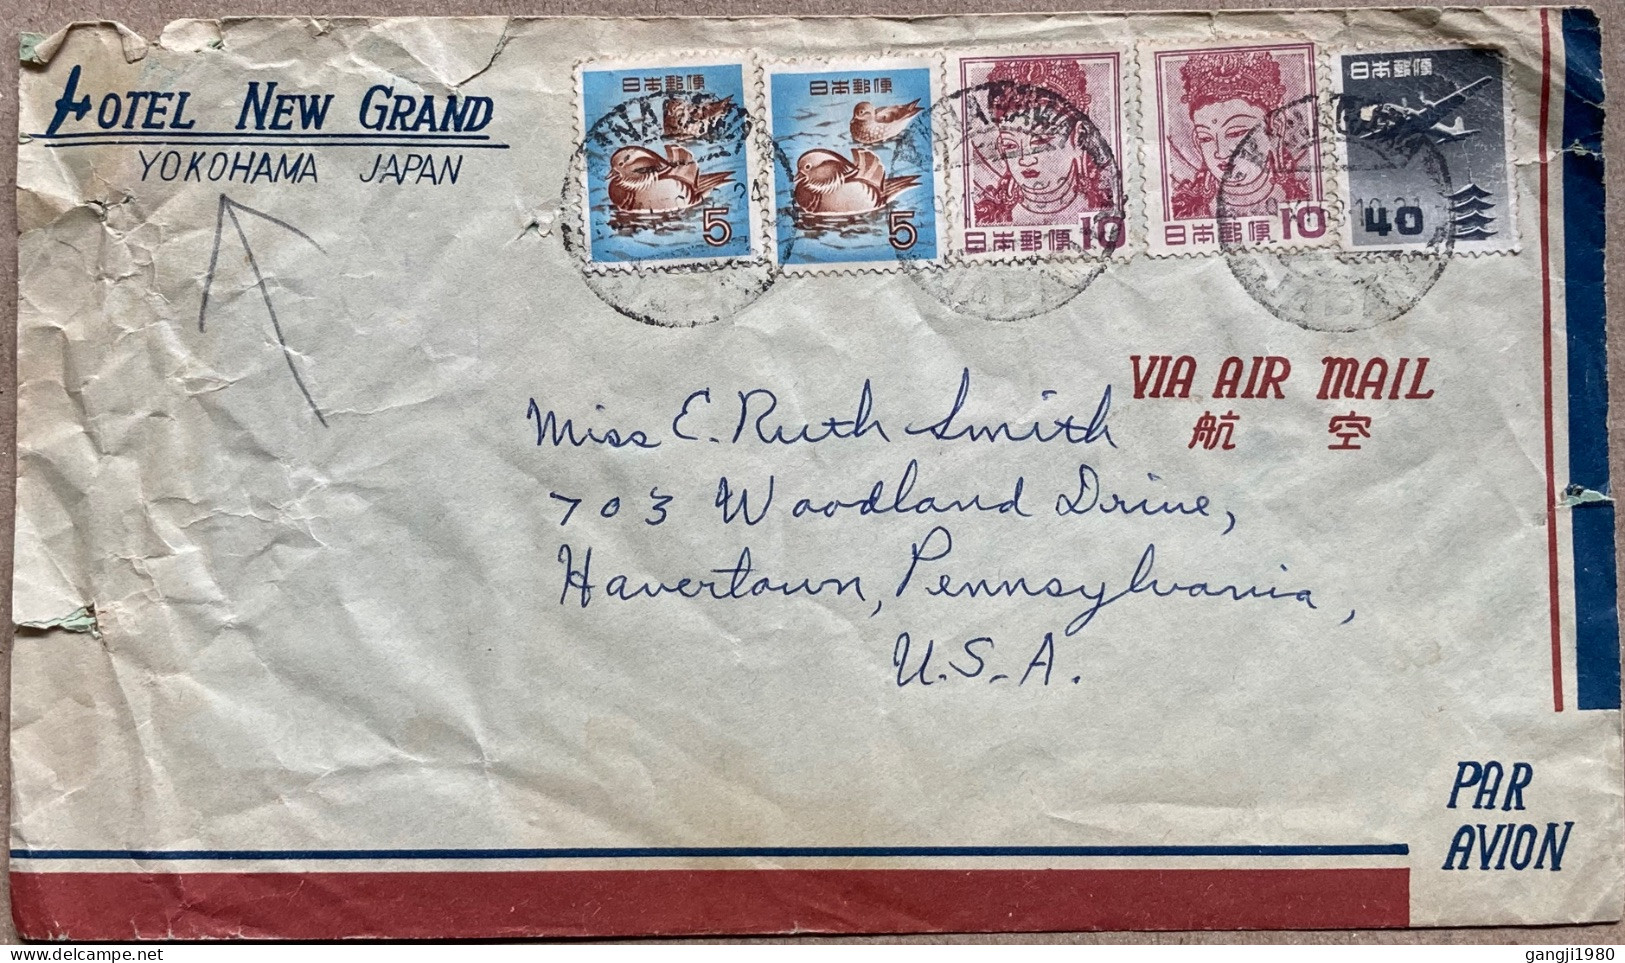 JAPAN 1958, COVER USED TO USA, ADVERTISING, HOTEL NEW GRAND, 5 STAMP, DUCK, AEROPLANE, YOKOHAMA CITY CANCEL. - Covers & Documents